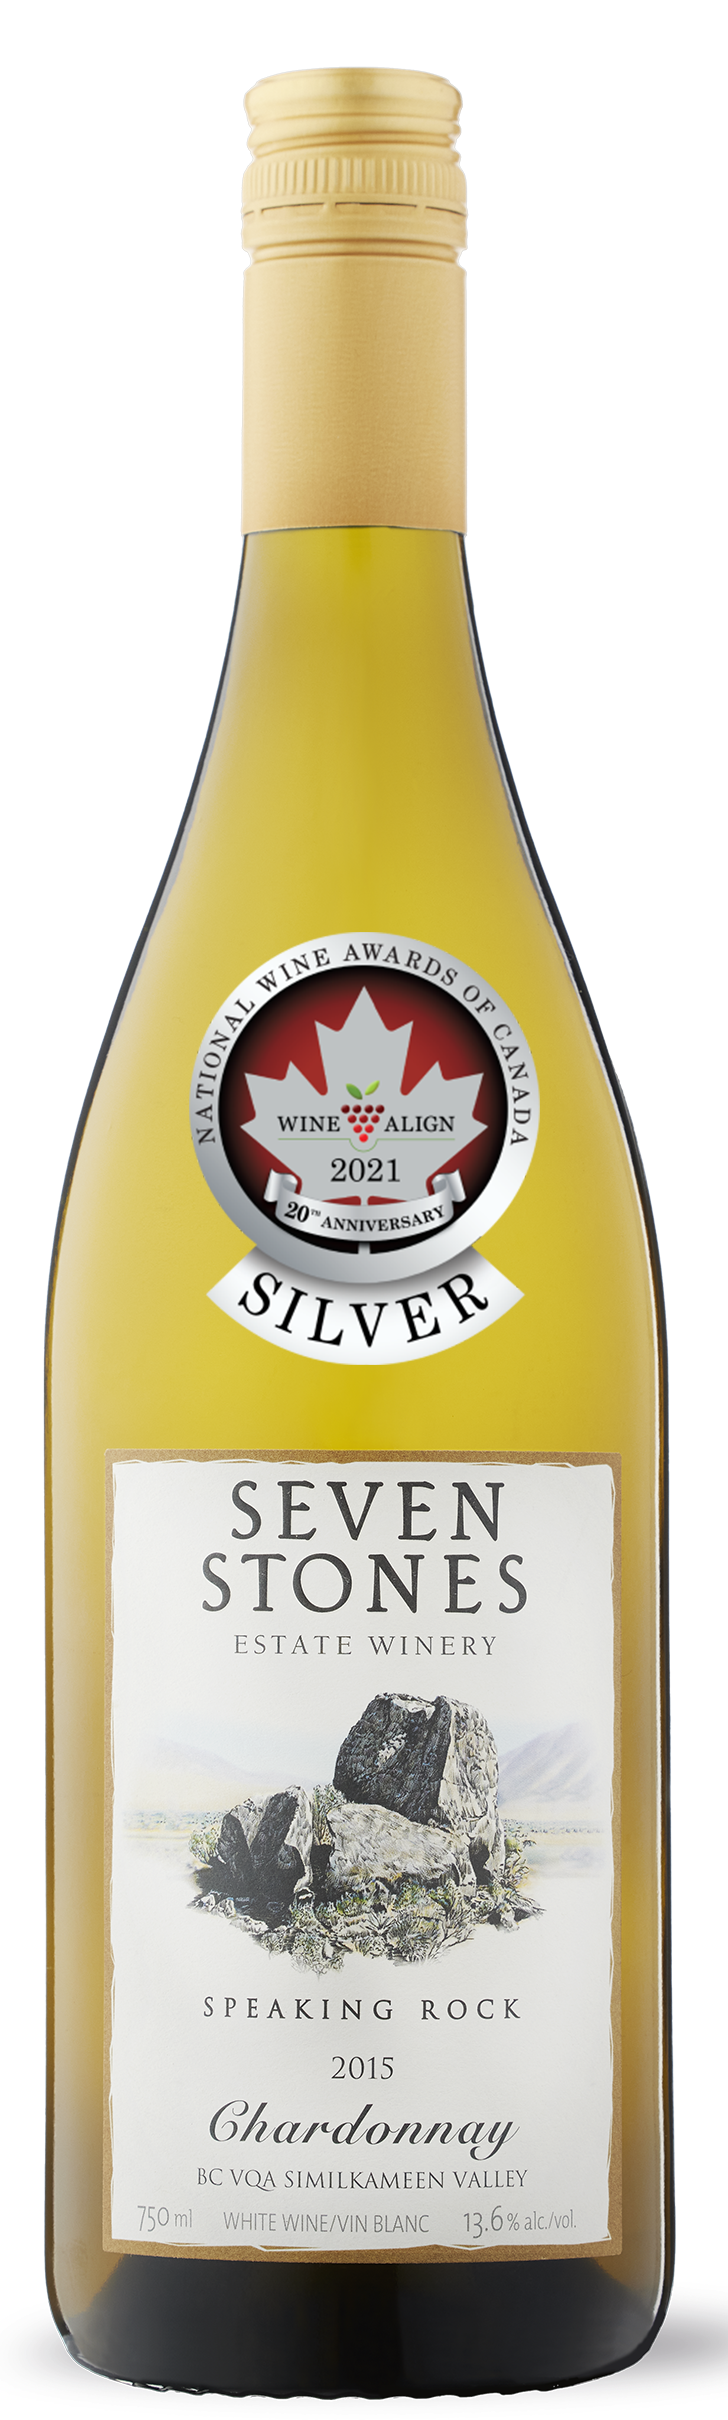 Product Image for 2015 Chardonnay